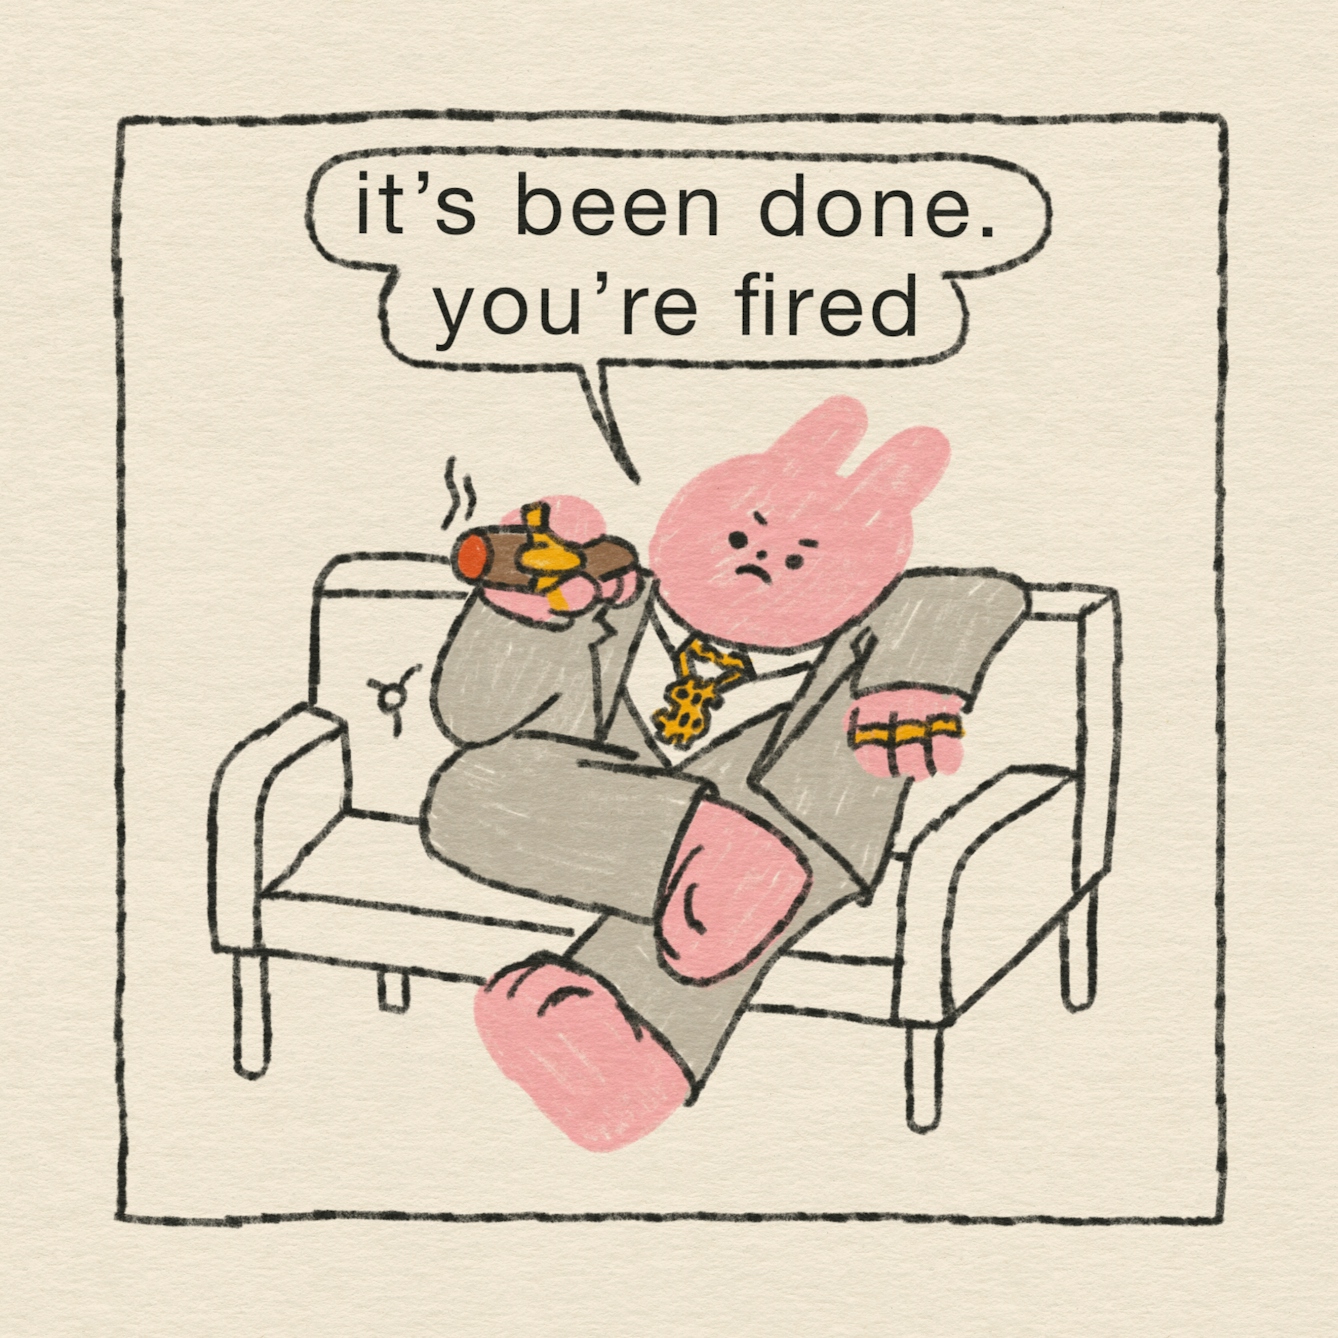 Panel 3 of 4: The CEO rabbit, in his grey suit and gold jewellery, looks unimpressed. He’s smoking a cigar on the sofa. “It’s been done. You’re fired,” he says. 